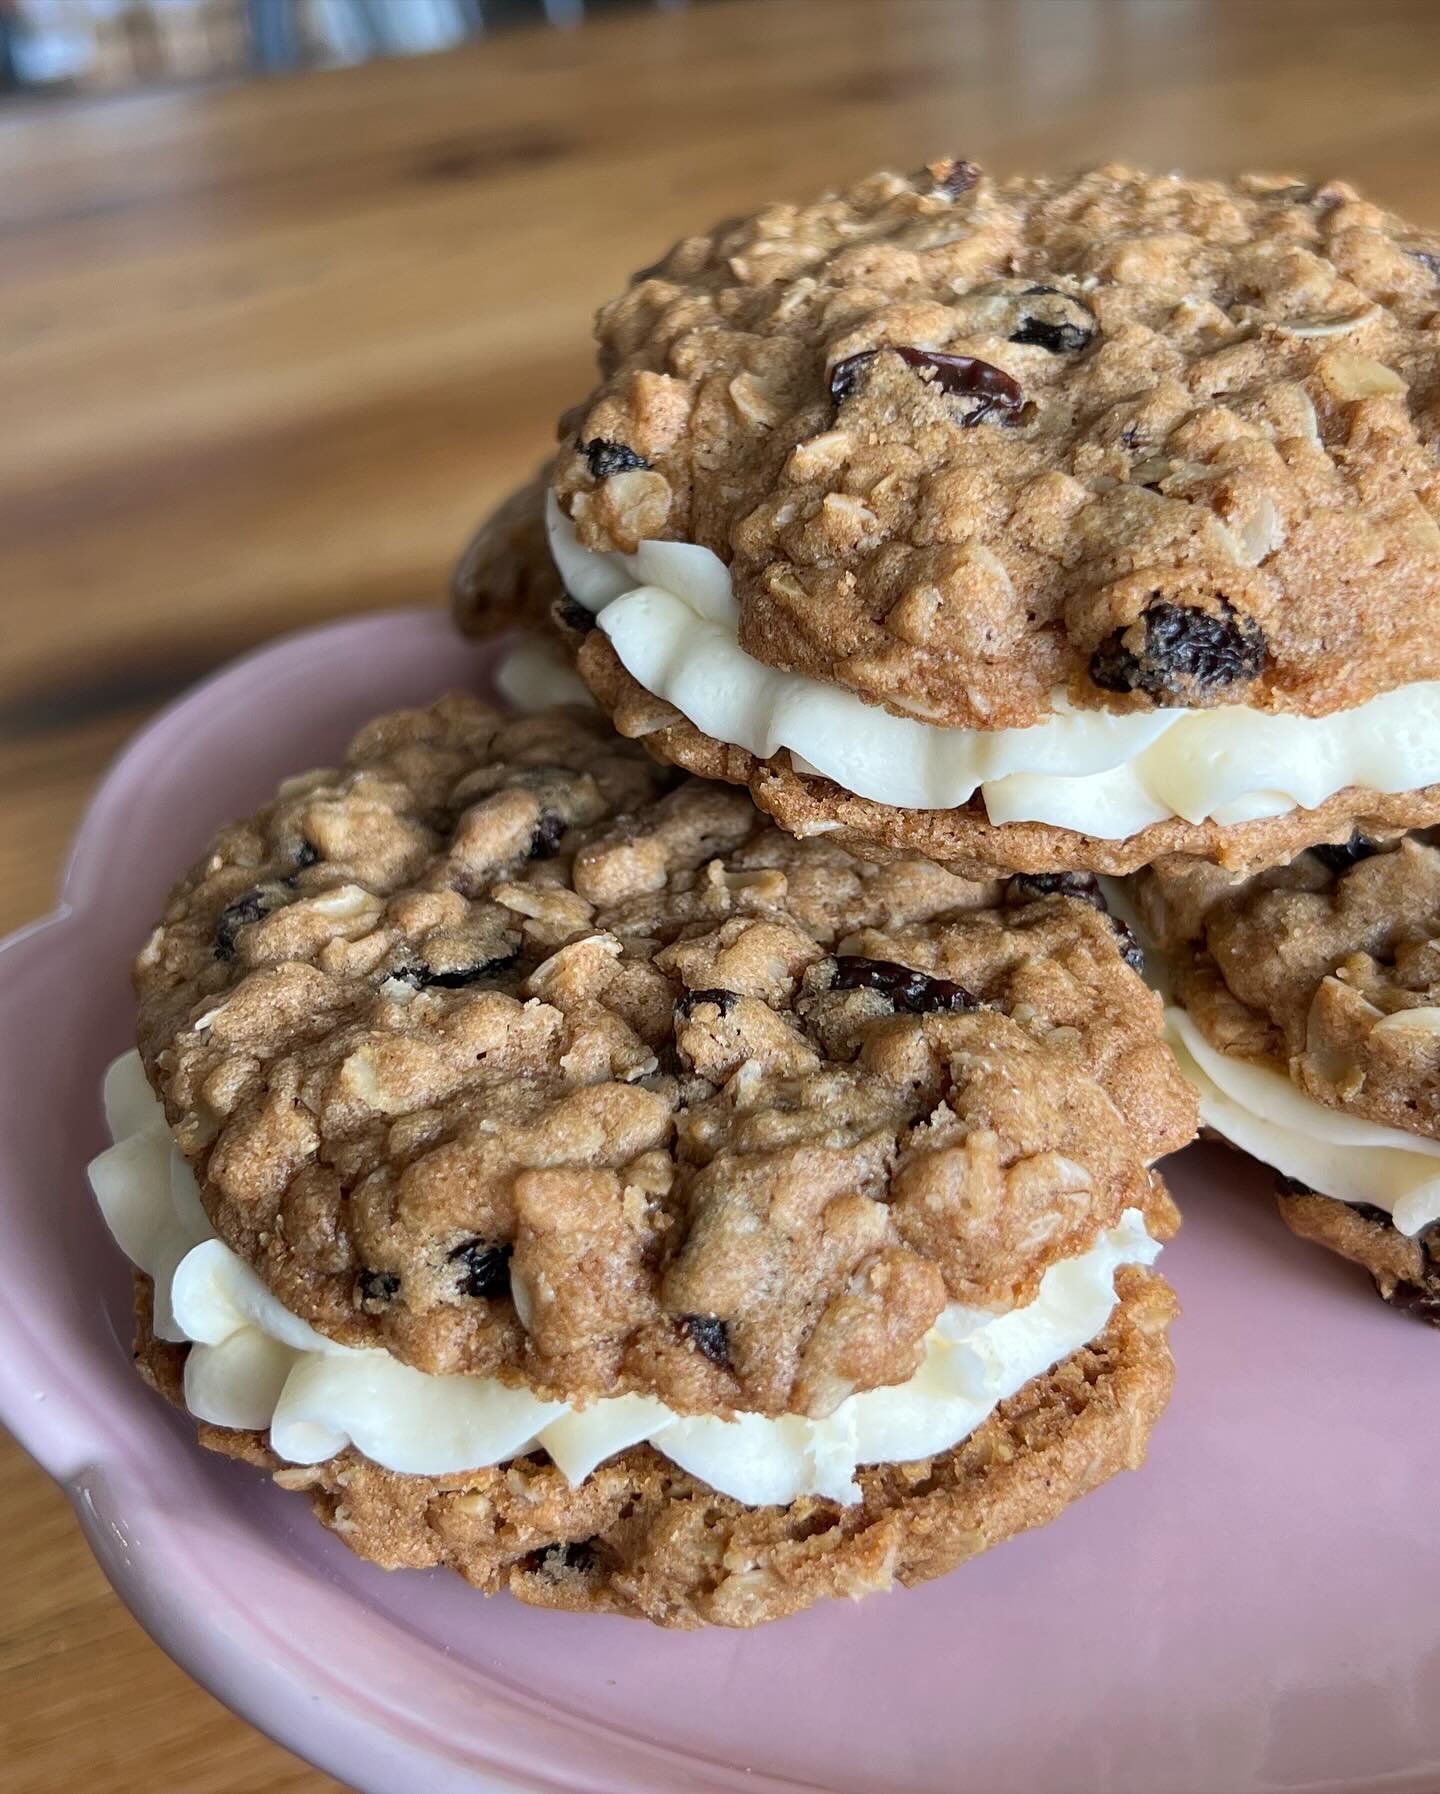 ✨Oatmeal Cookie Sandwiches available now at Shugah Hill. That&rsquo;s little Deborah to you pal!✨
.
.
#oatmealcookies #cookiesandwich #bakery #hanoverma #southshorema